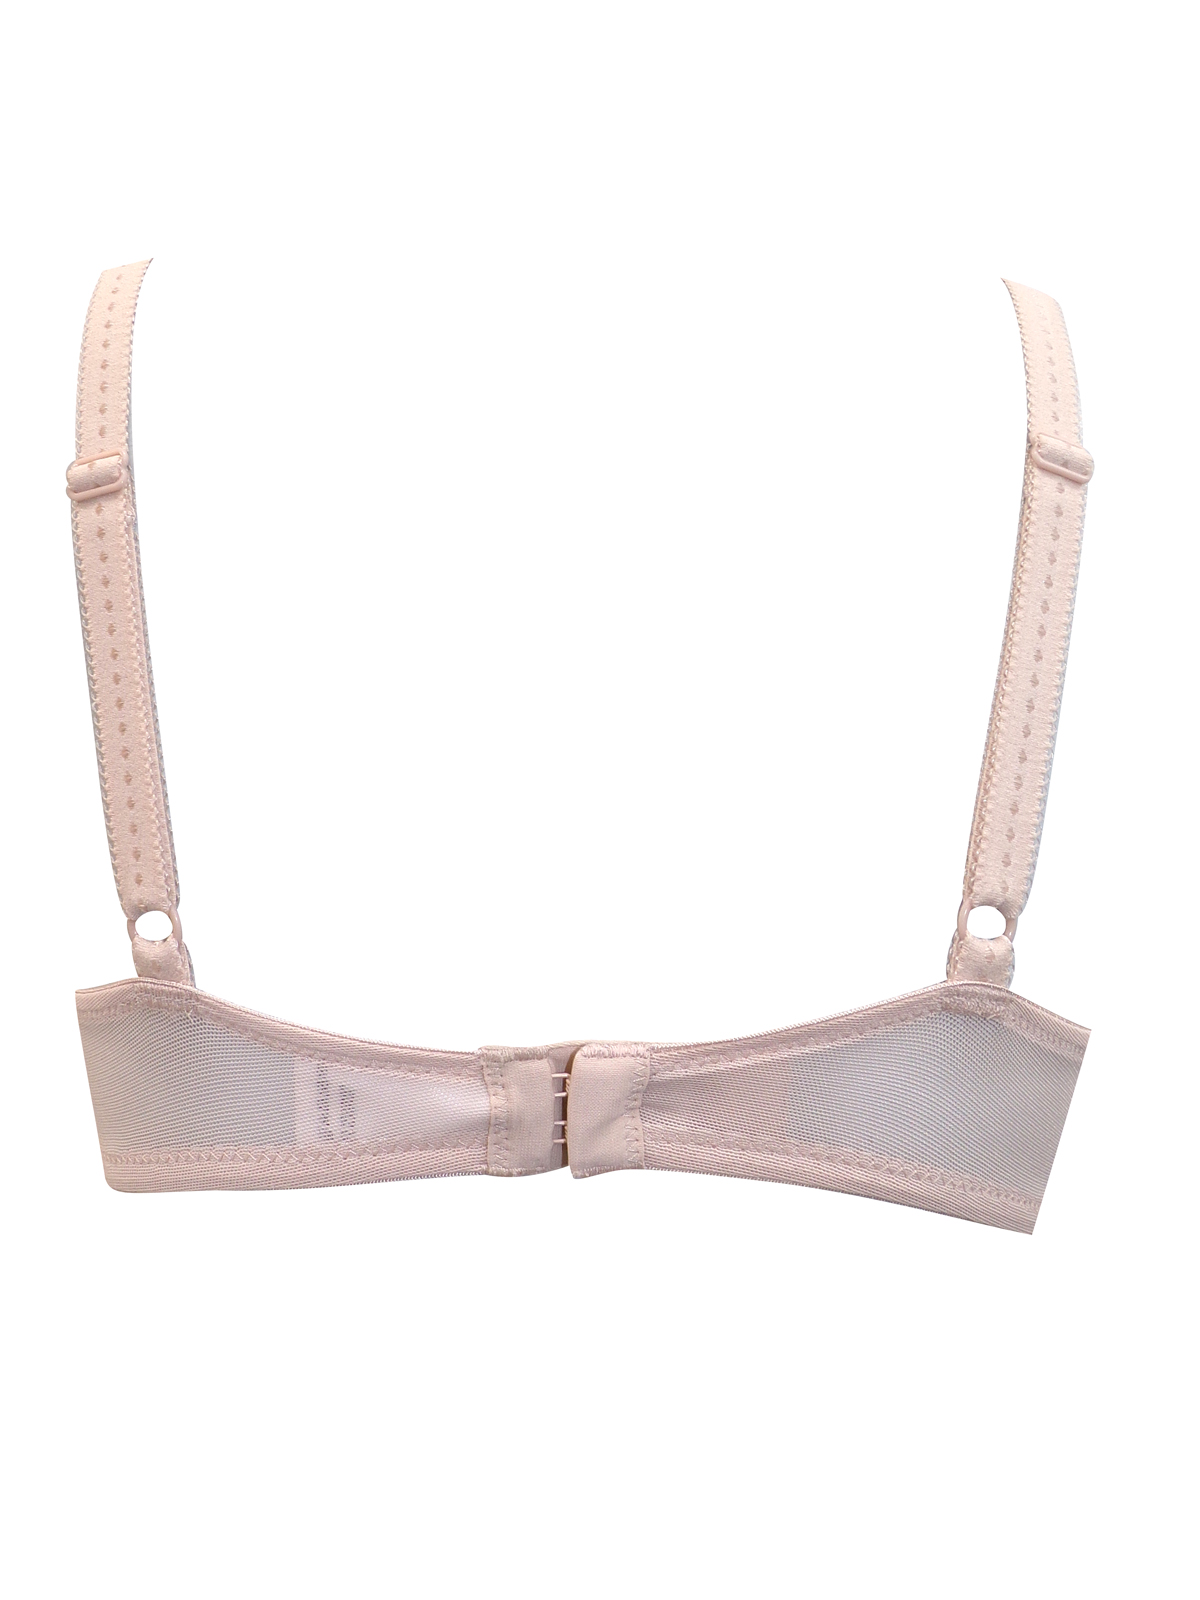 Marks and Spencer - - M&5 NUDE Isabella All Over Lace Underwired Full ...